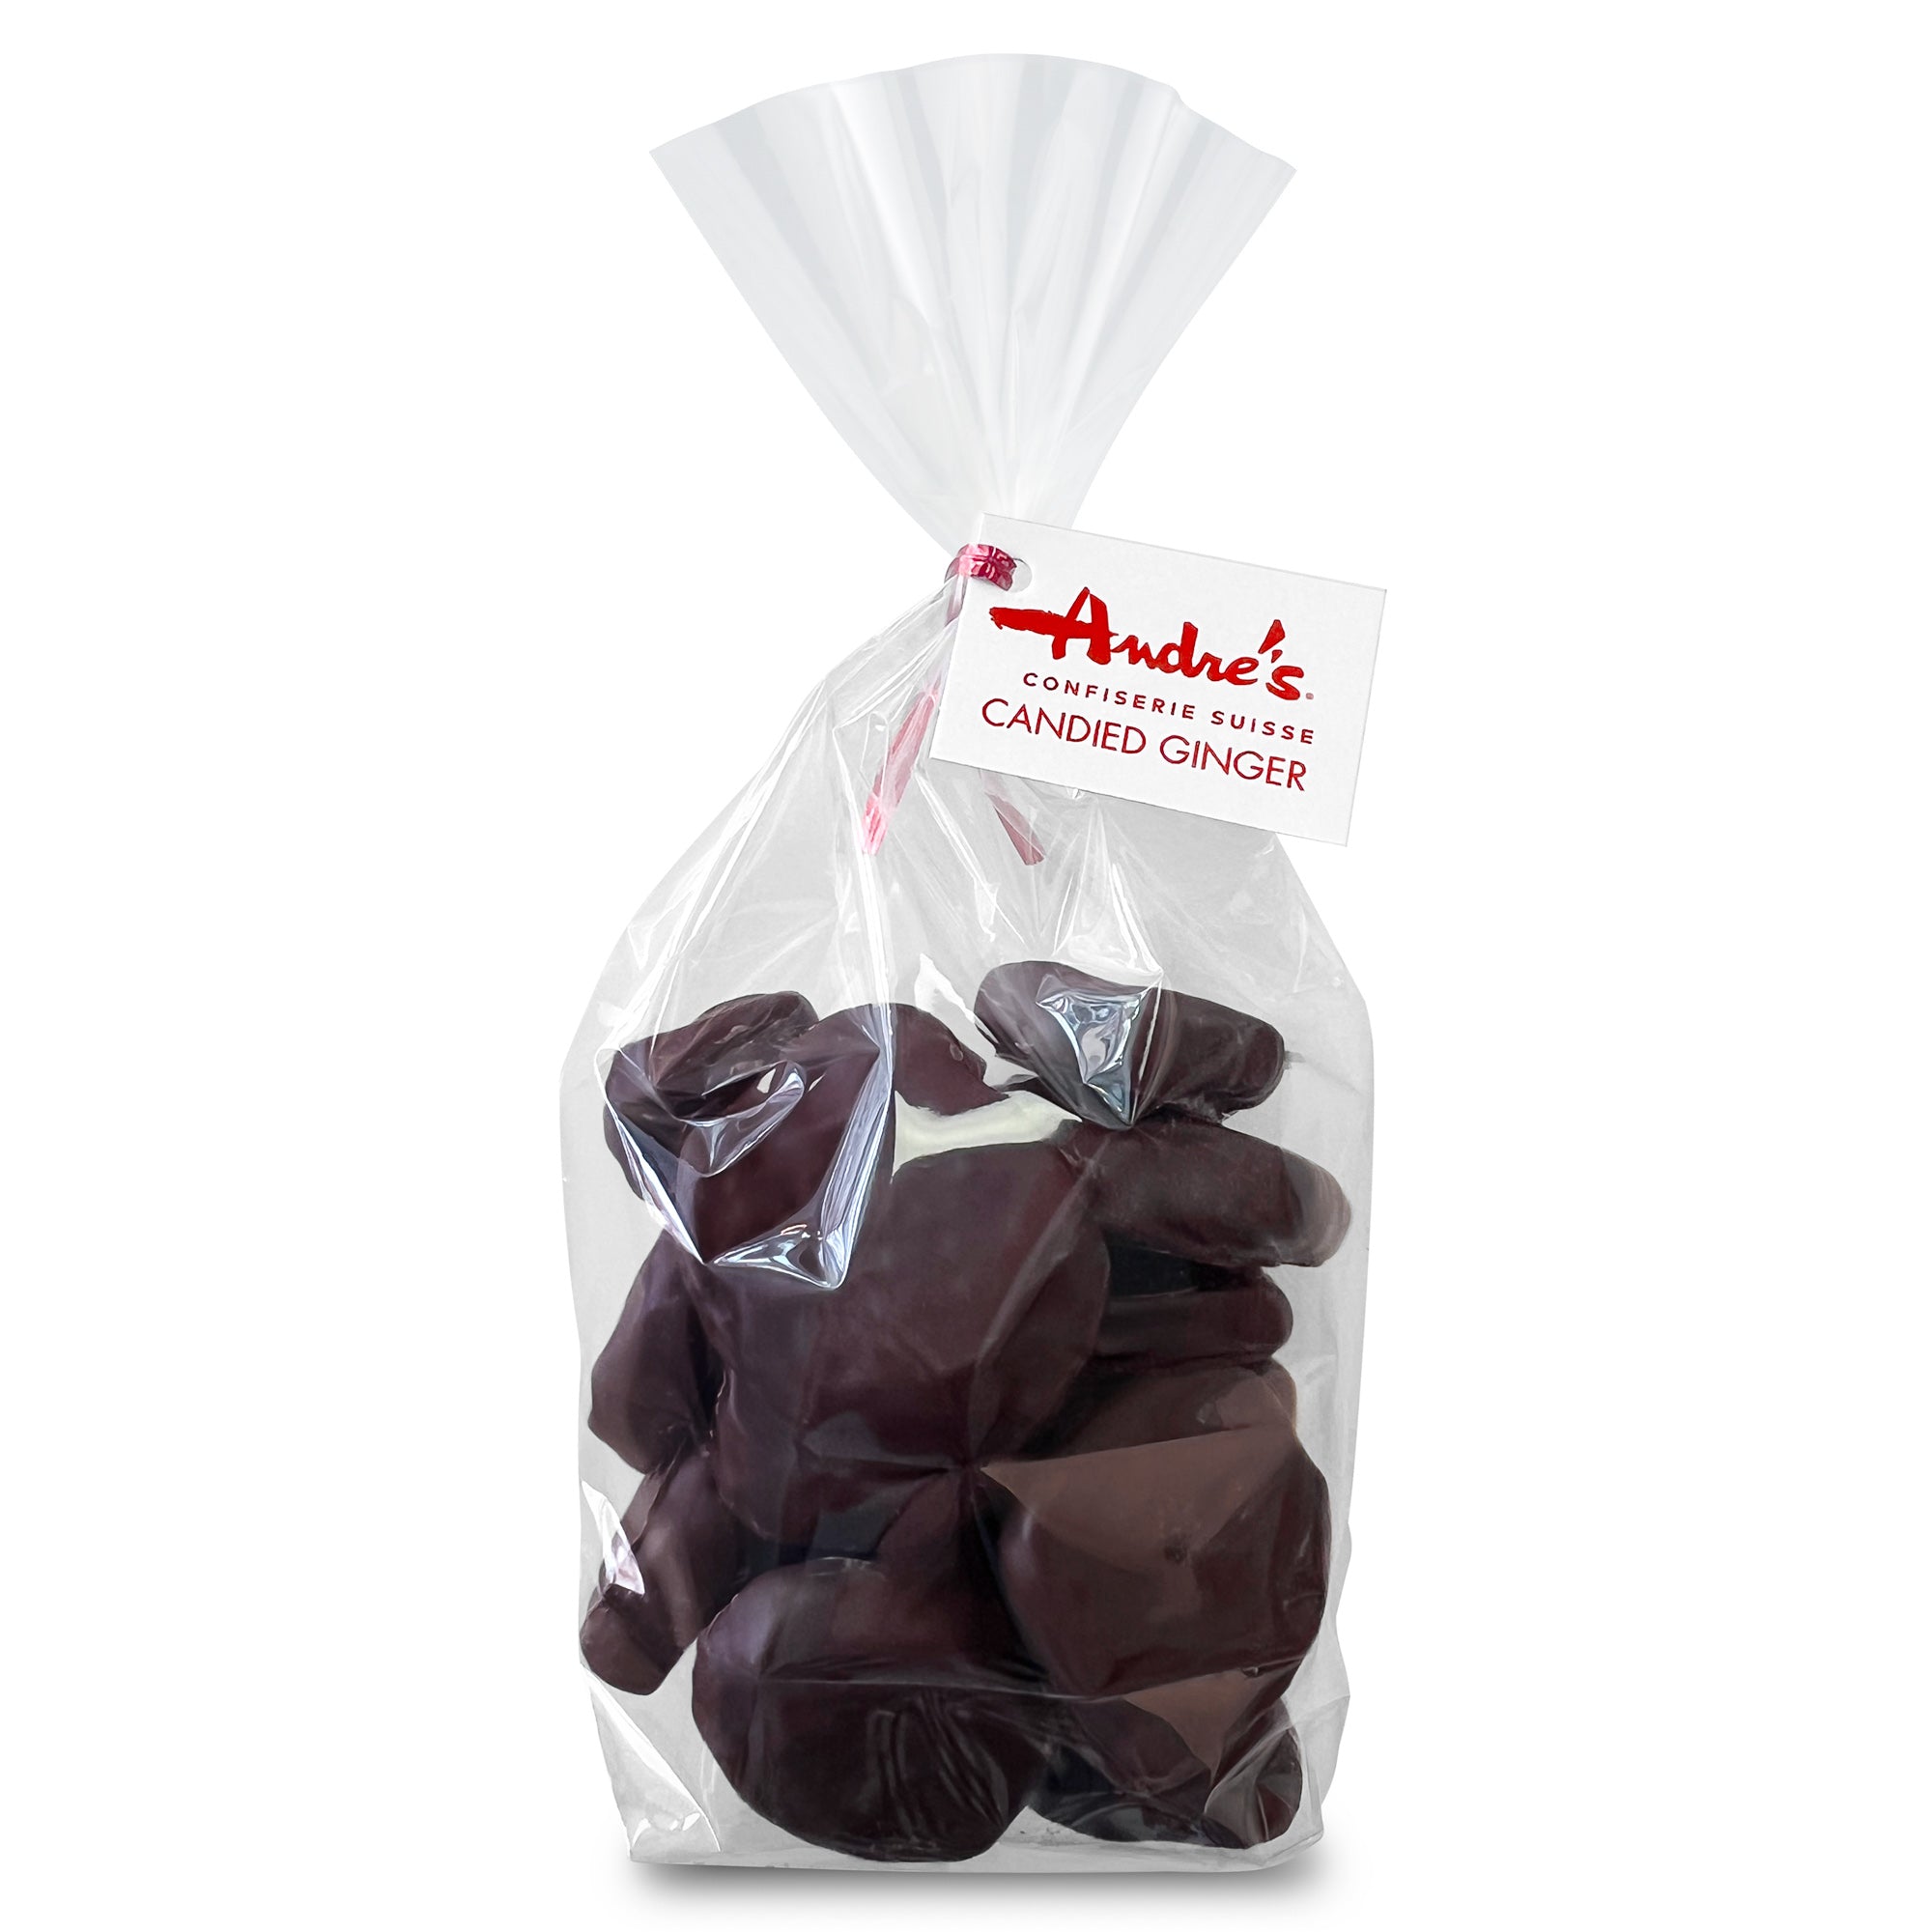 Chocolate Covered Candied Ginger